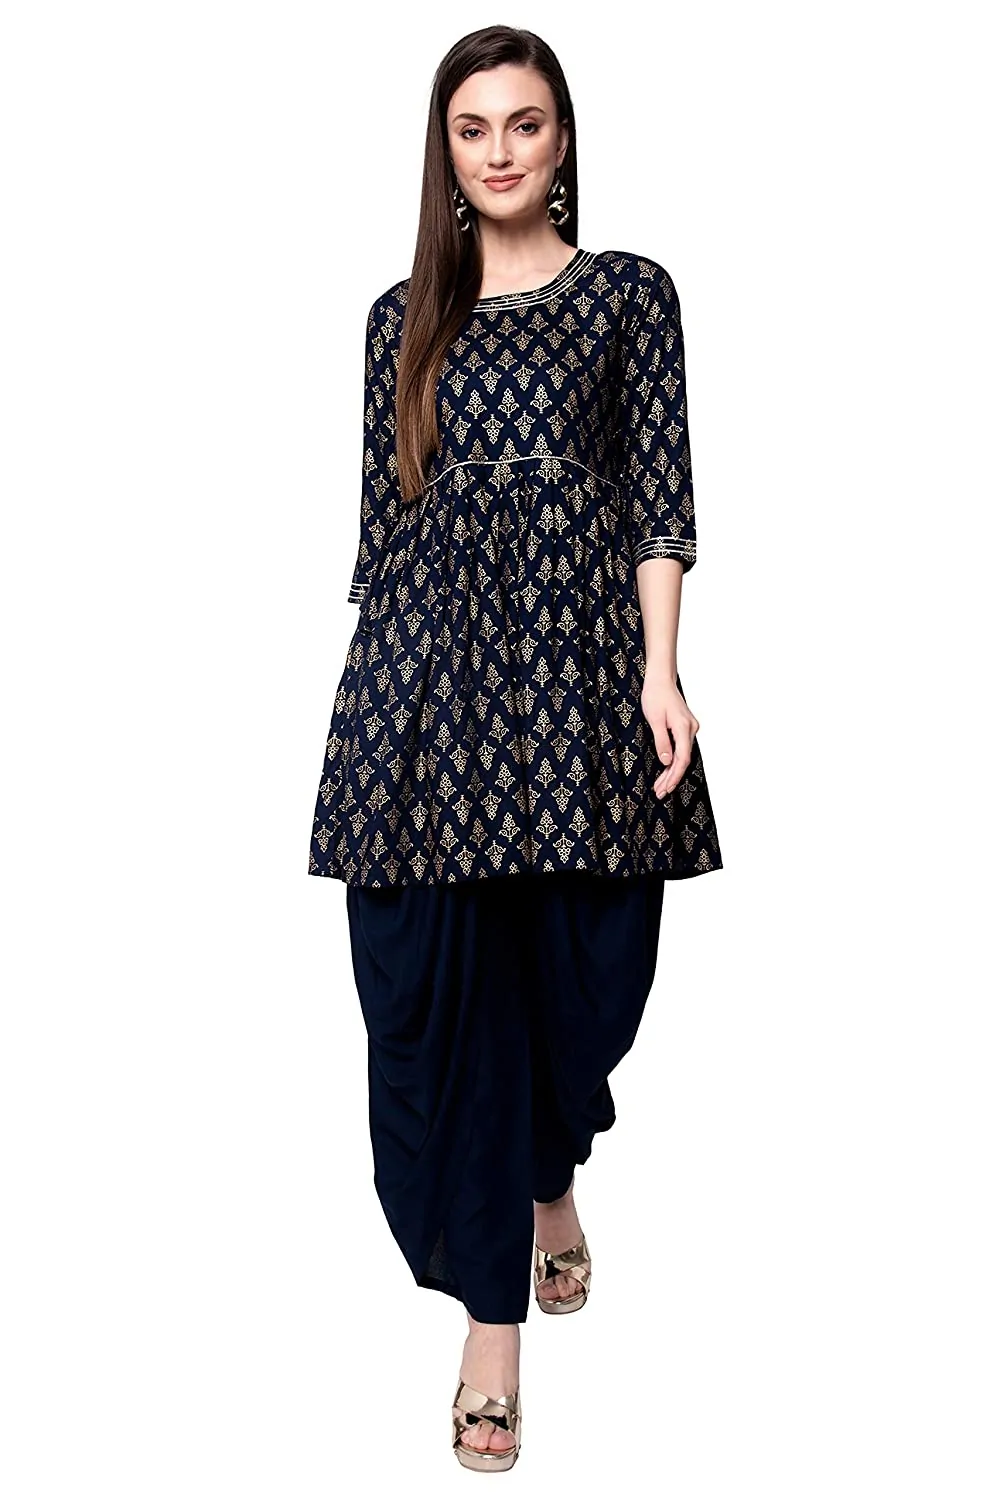 Buy Women Cloths Online, Affordable Kurti & Dress Material for Women Online  - page 17